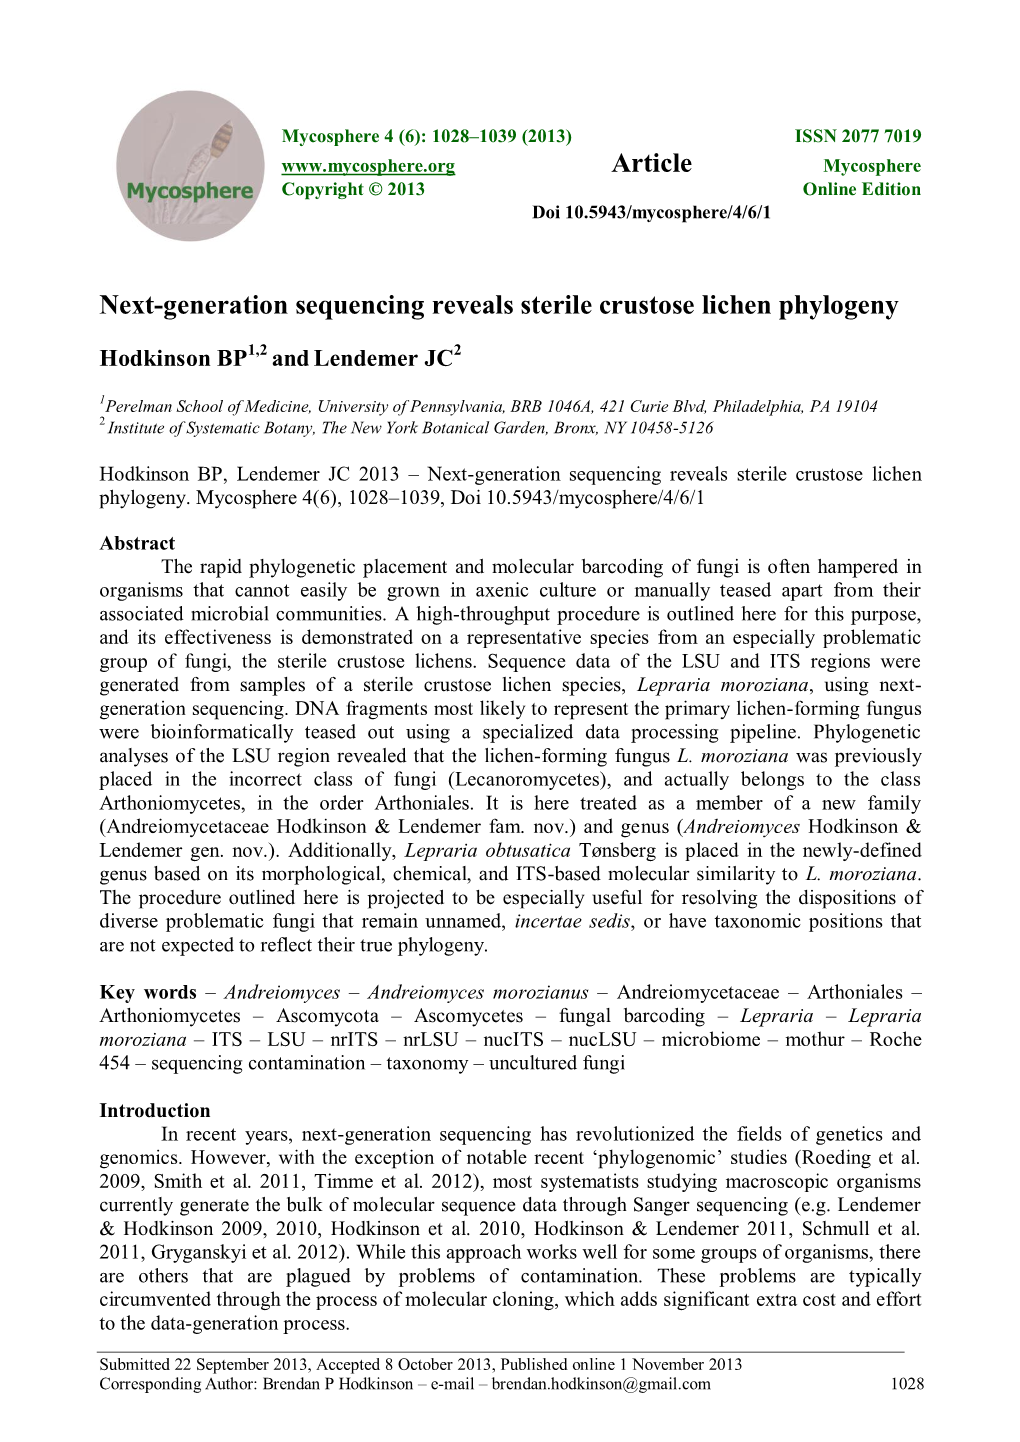 Next-Generation Sequencing Reveals Sterile Crustose Lichen Phylogeny